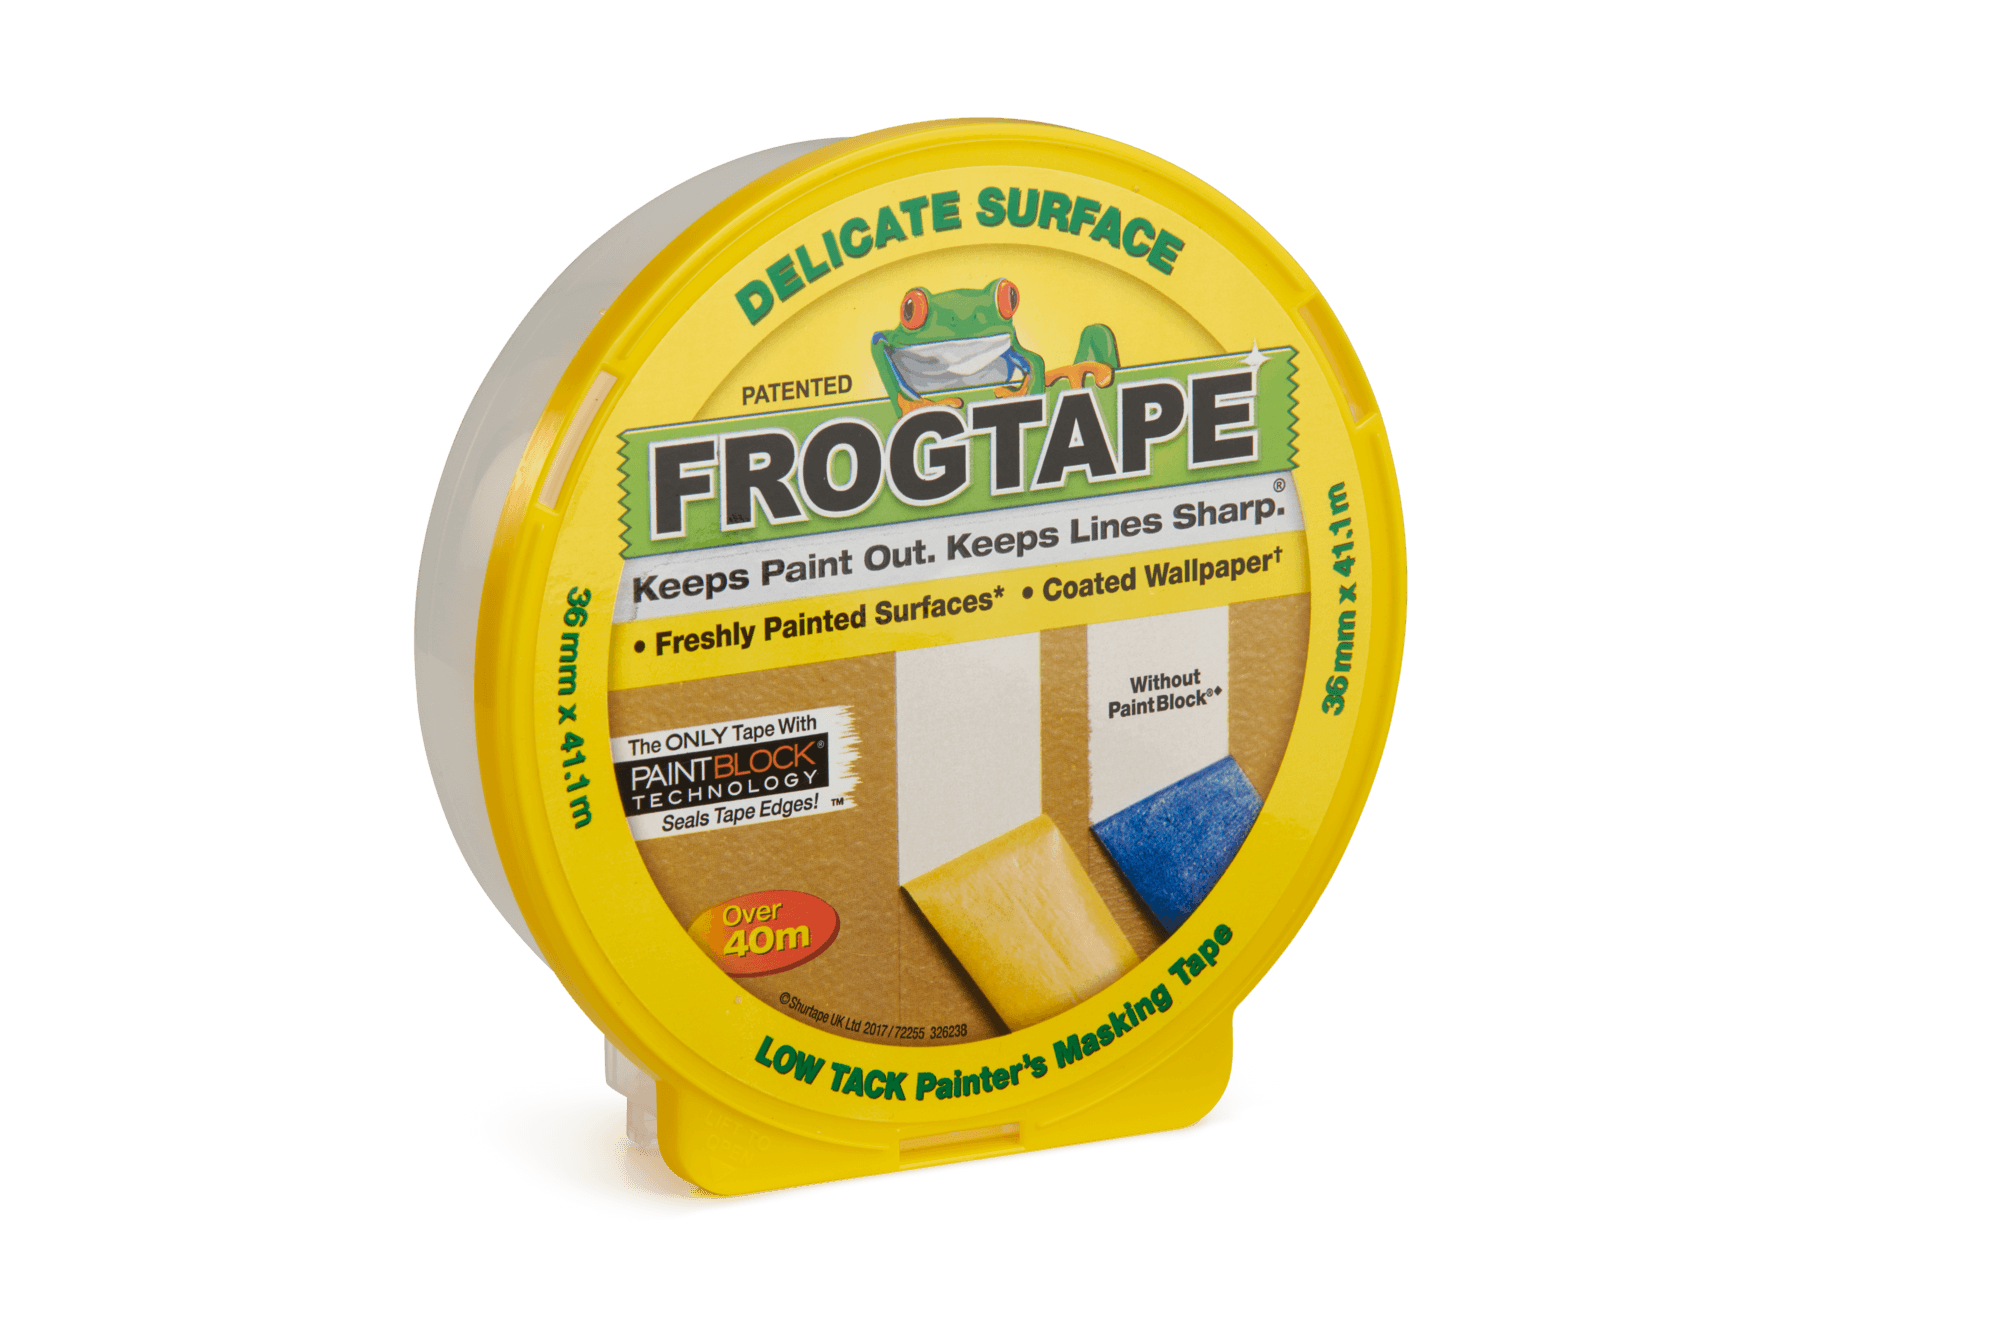 FrogTape Painters Masking Tape Delicate Surface 36mm